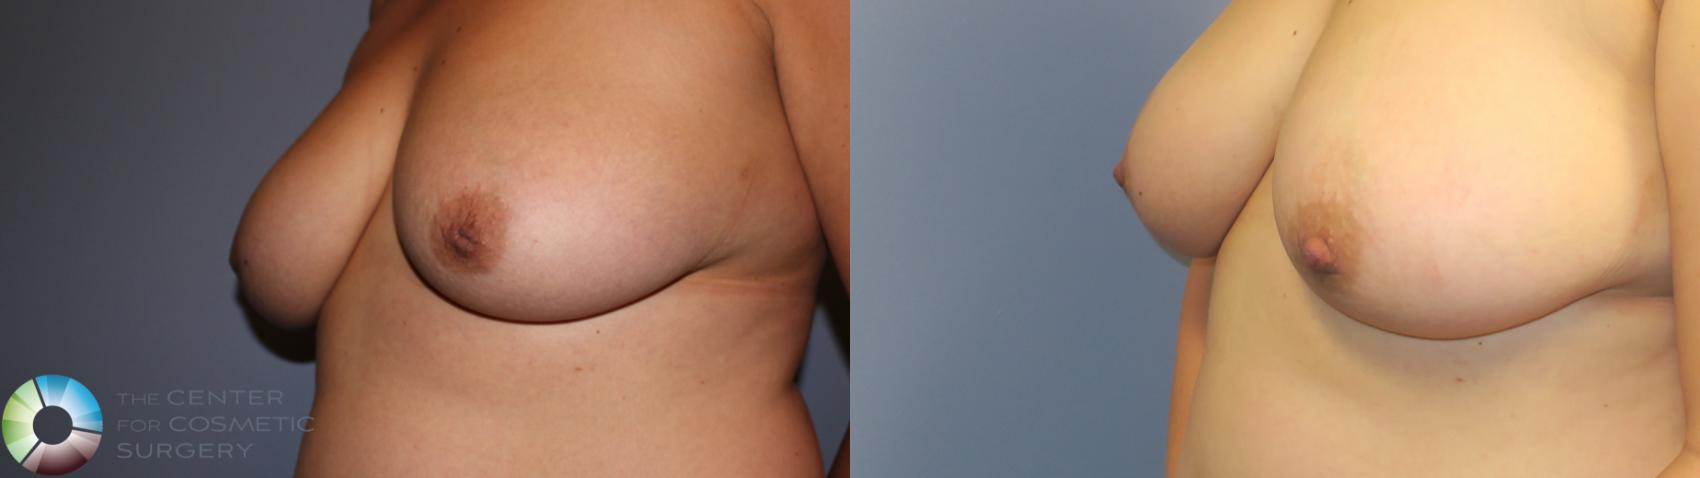 Before & After Inverted Nipple Repair Case 11338 Left Oblique View in Golden, CO